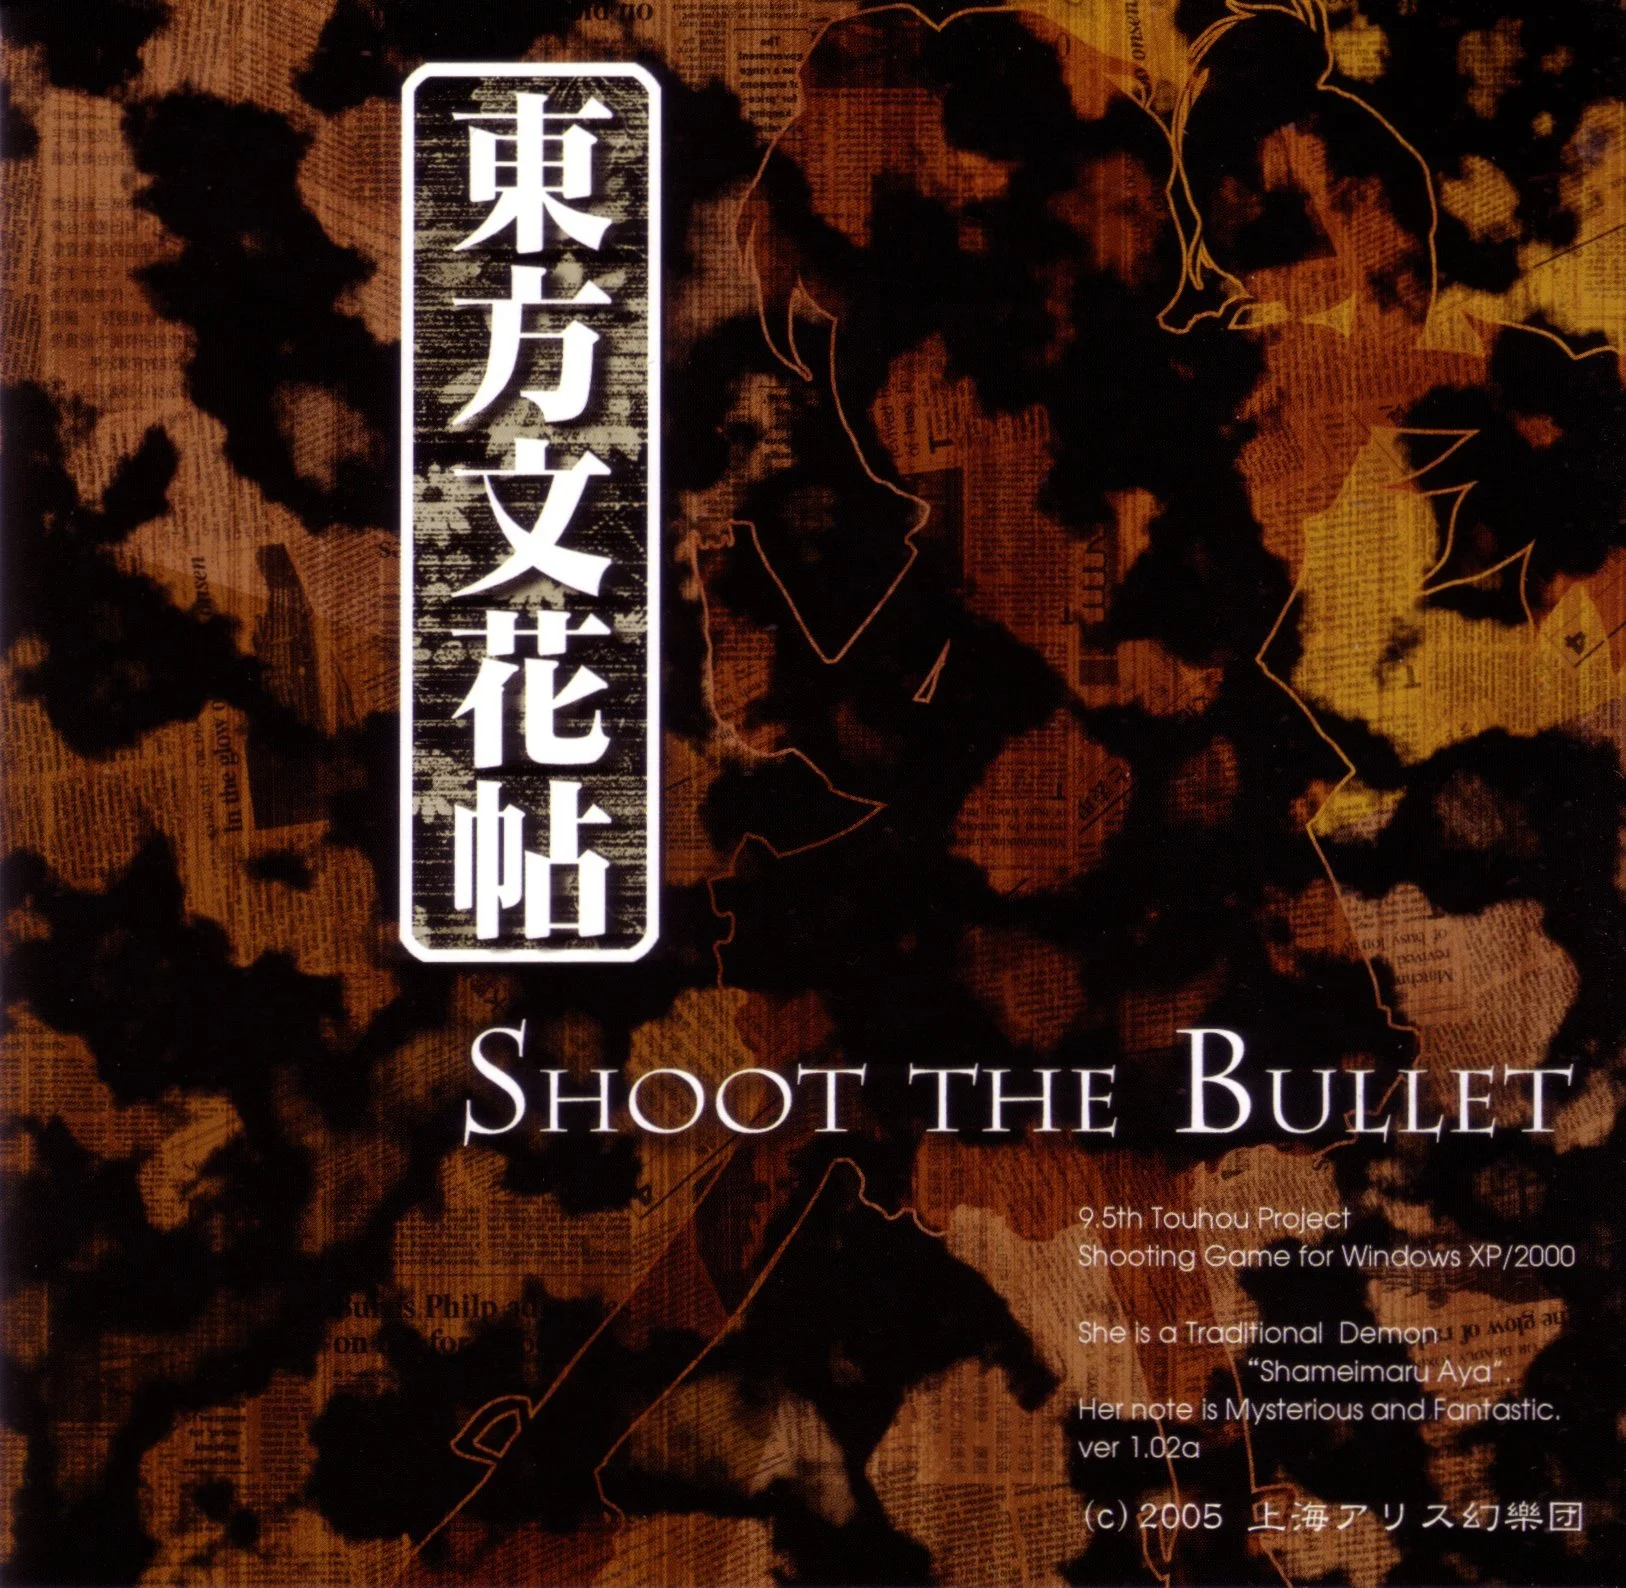 Touhou 09.5 - Shoot the Bullet